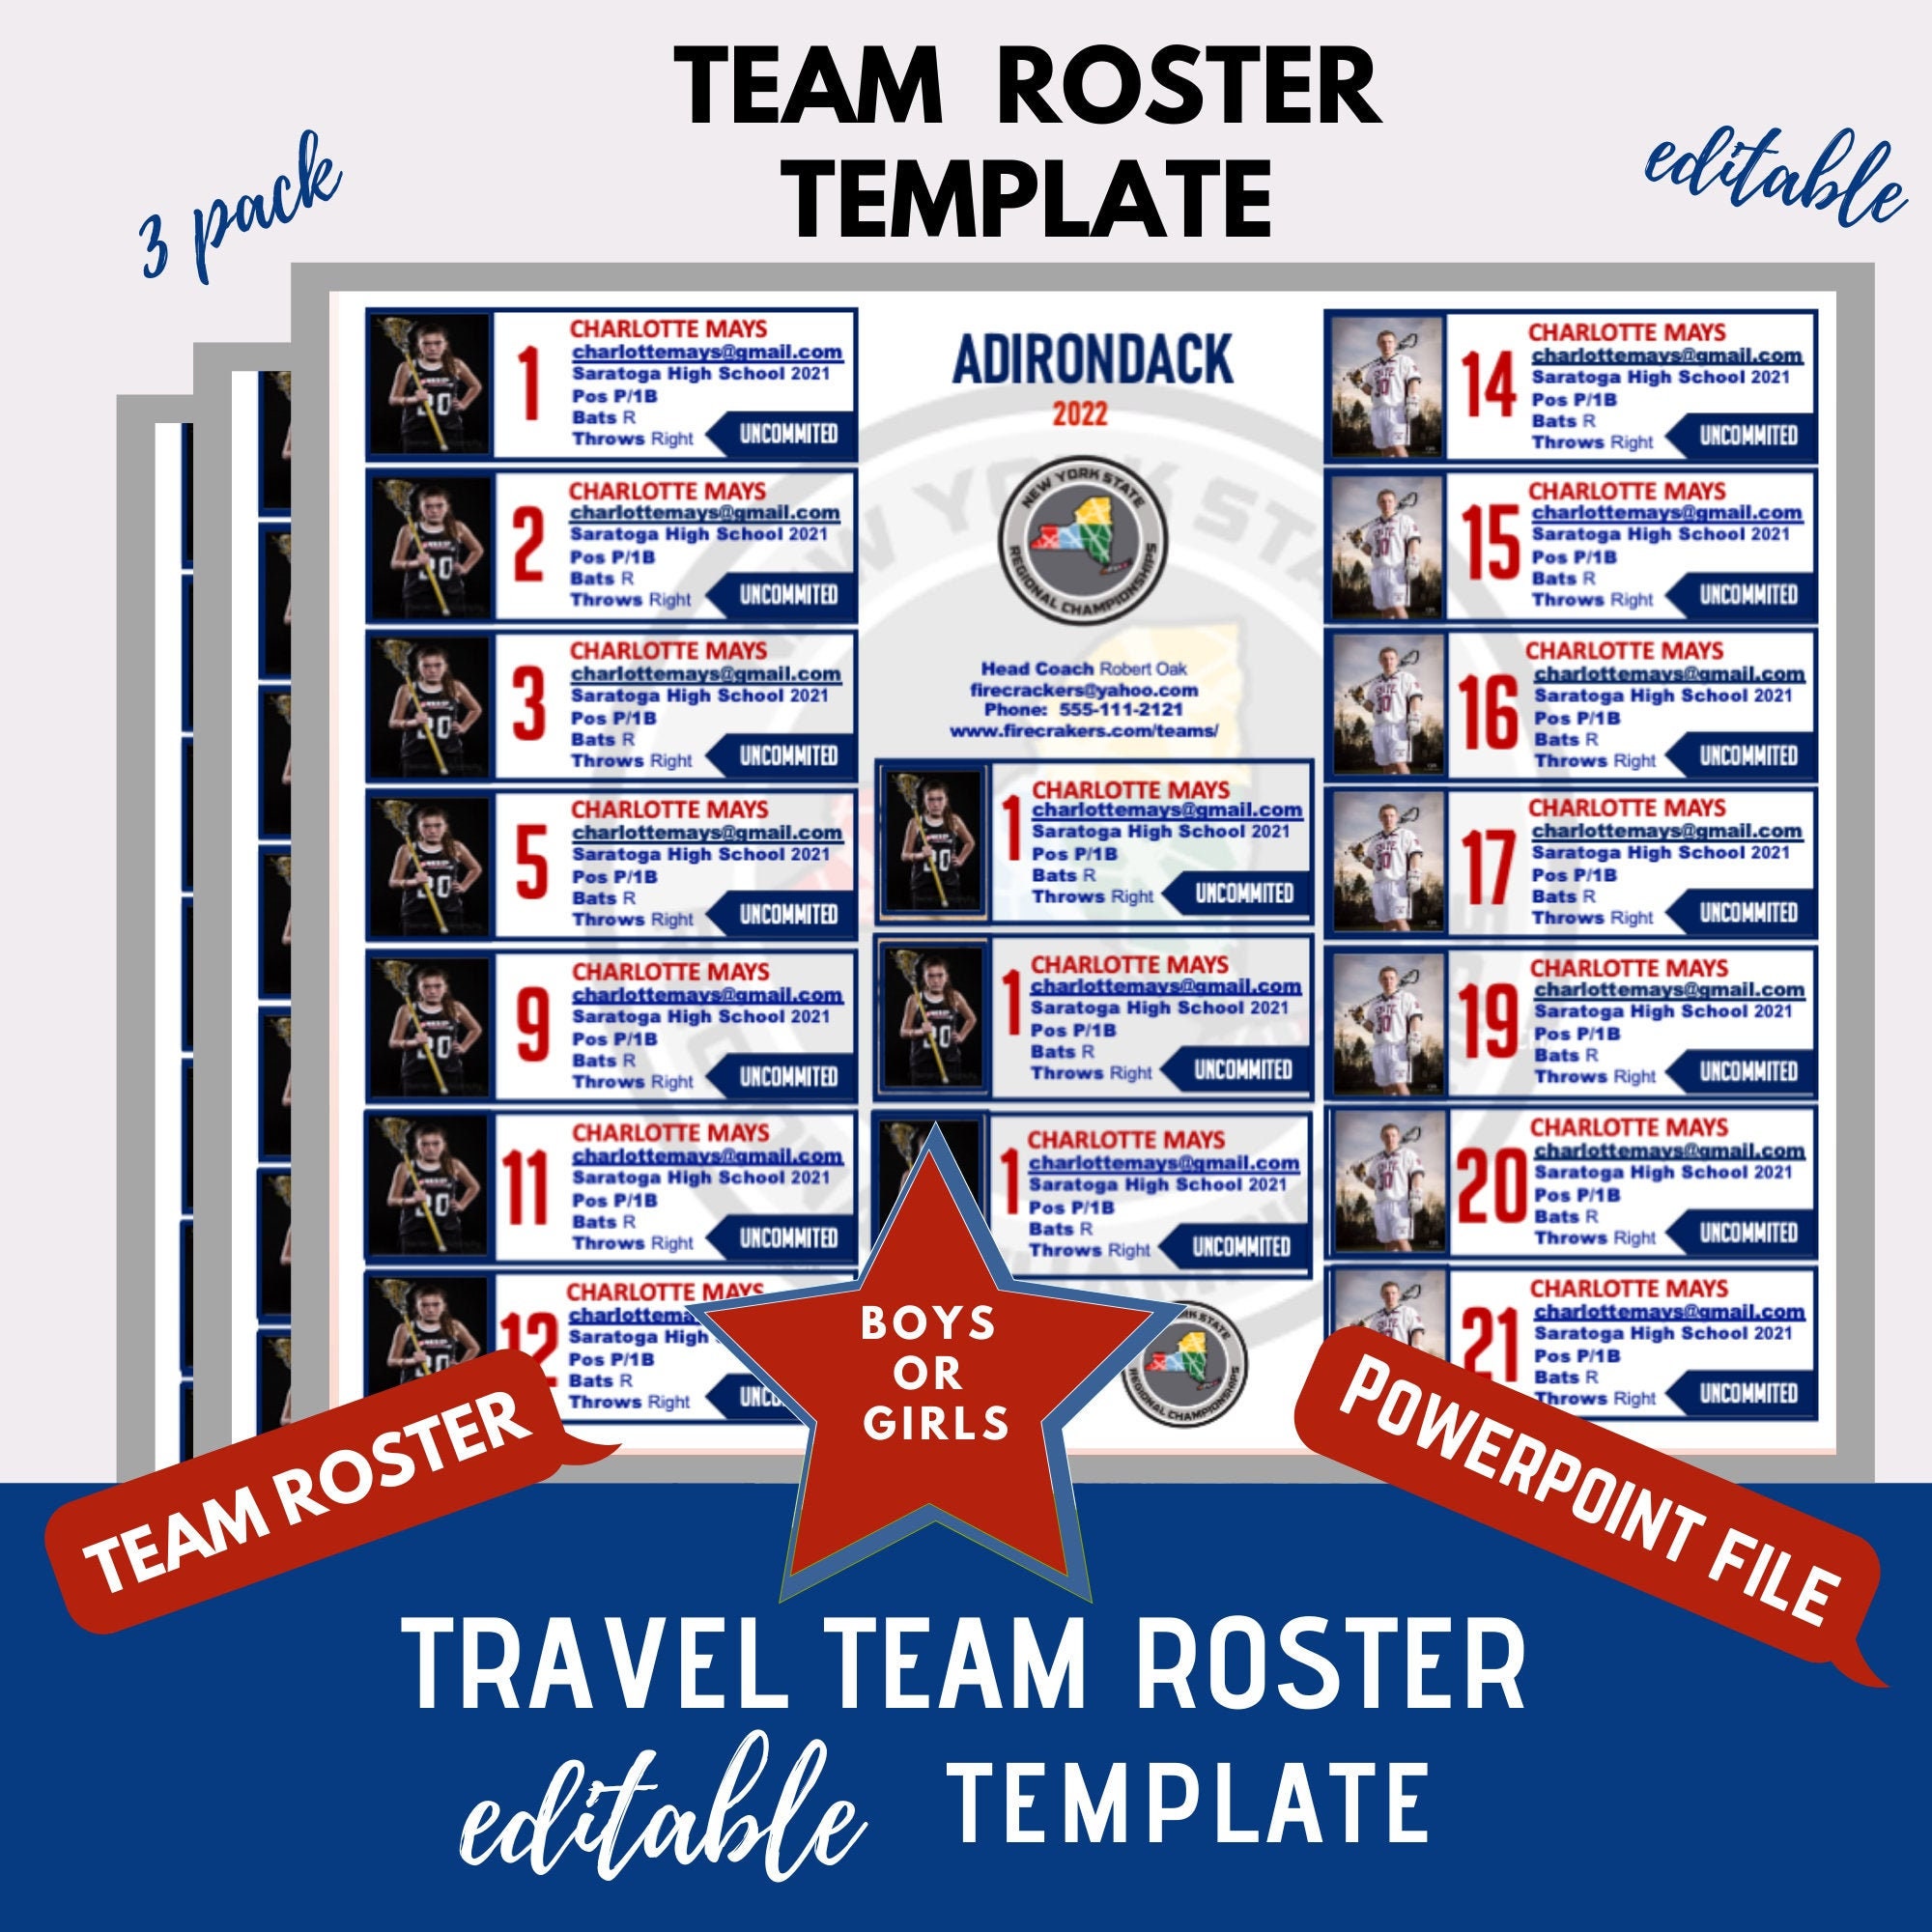 Team Roster Template 3 Pack 18 24 and 25 Players | Etsy